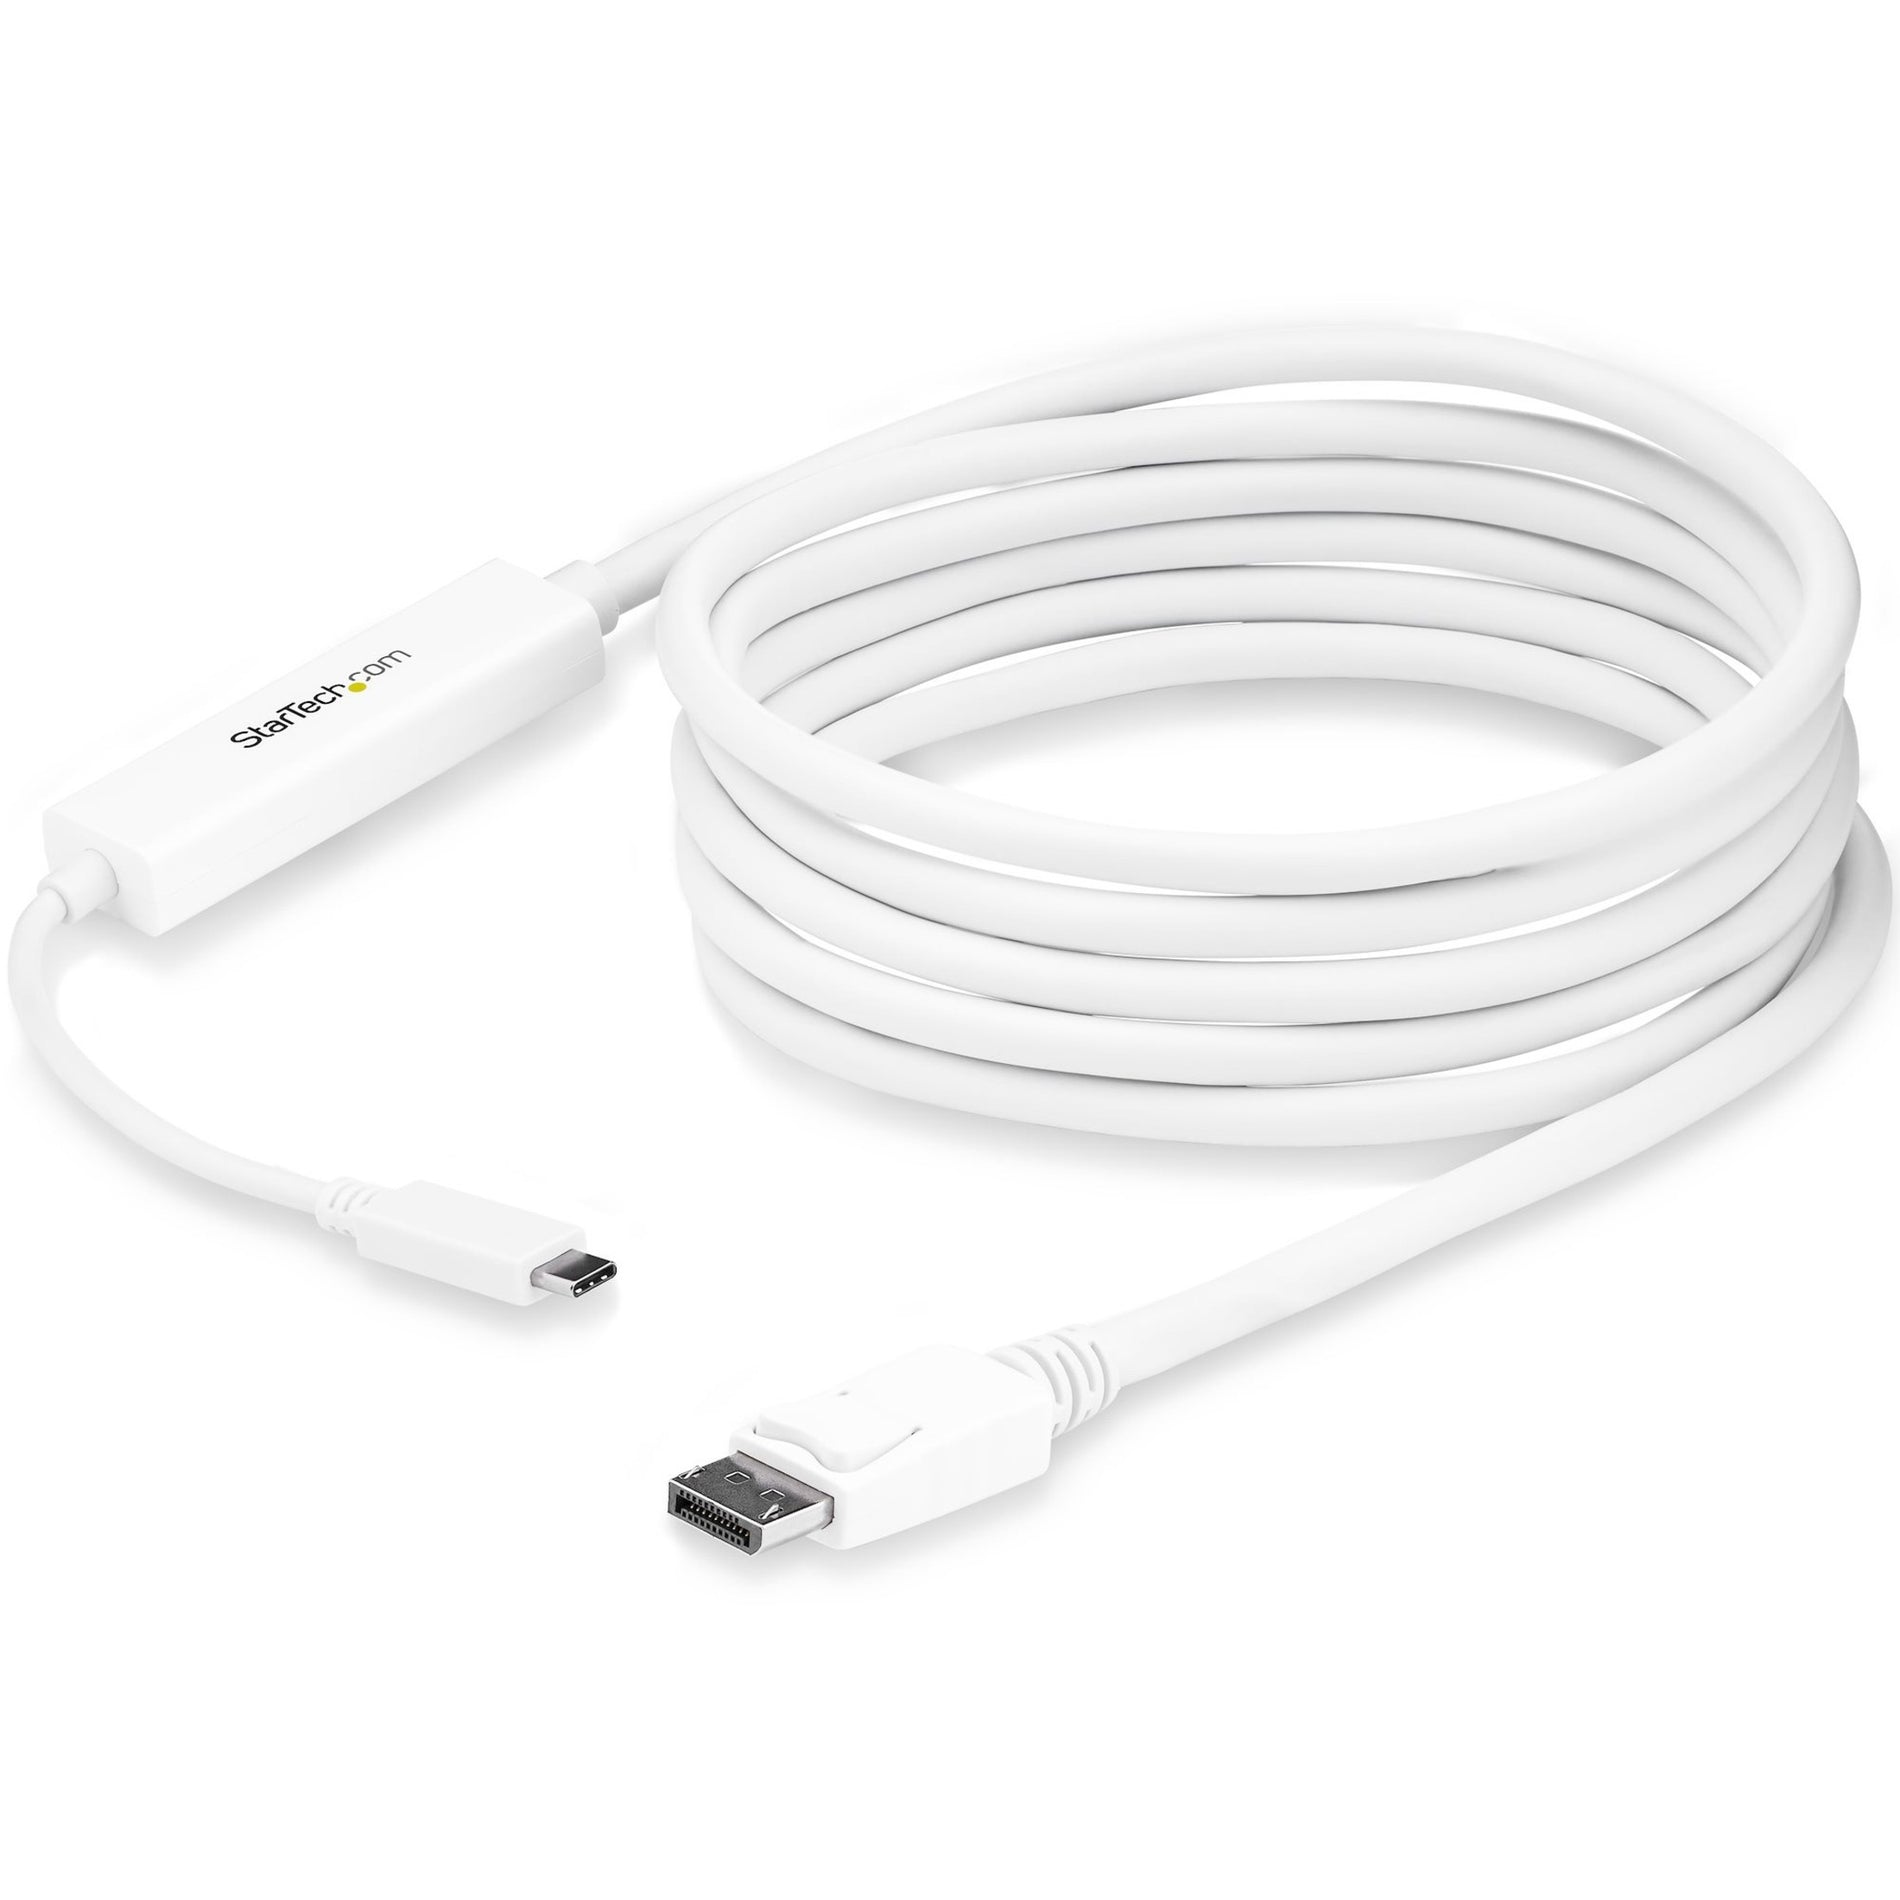 StarTech.com CDP2DPMM3MW 3m USB-C to DisplayPort Cable - 4K 60Hz, White [Discontinued]